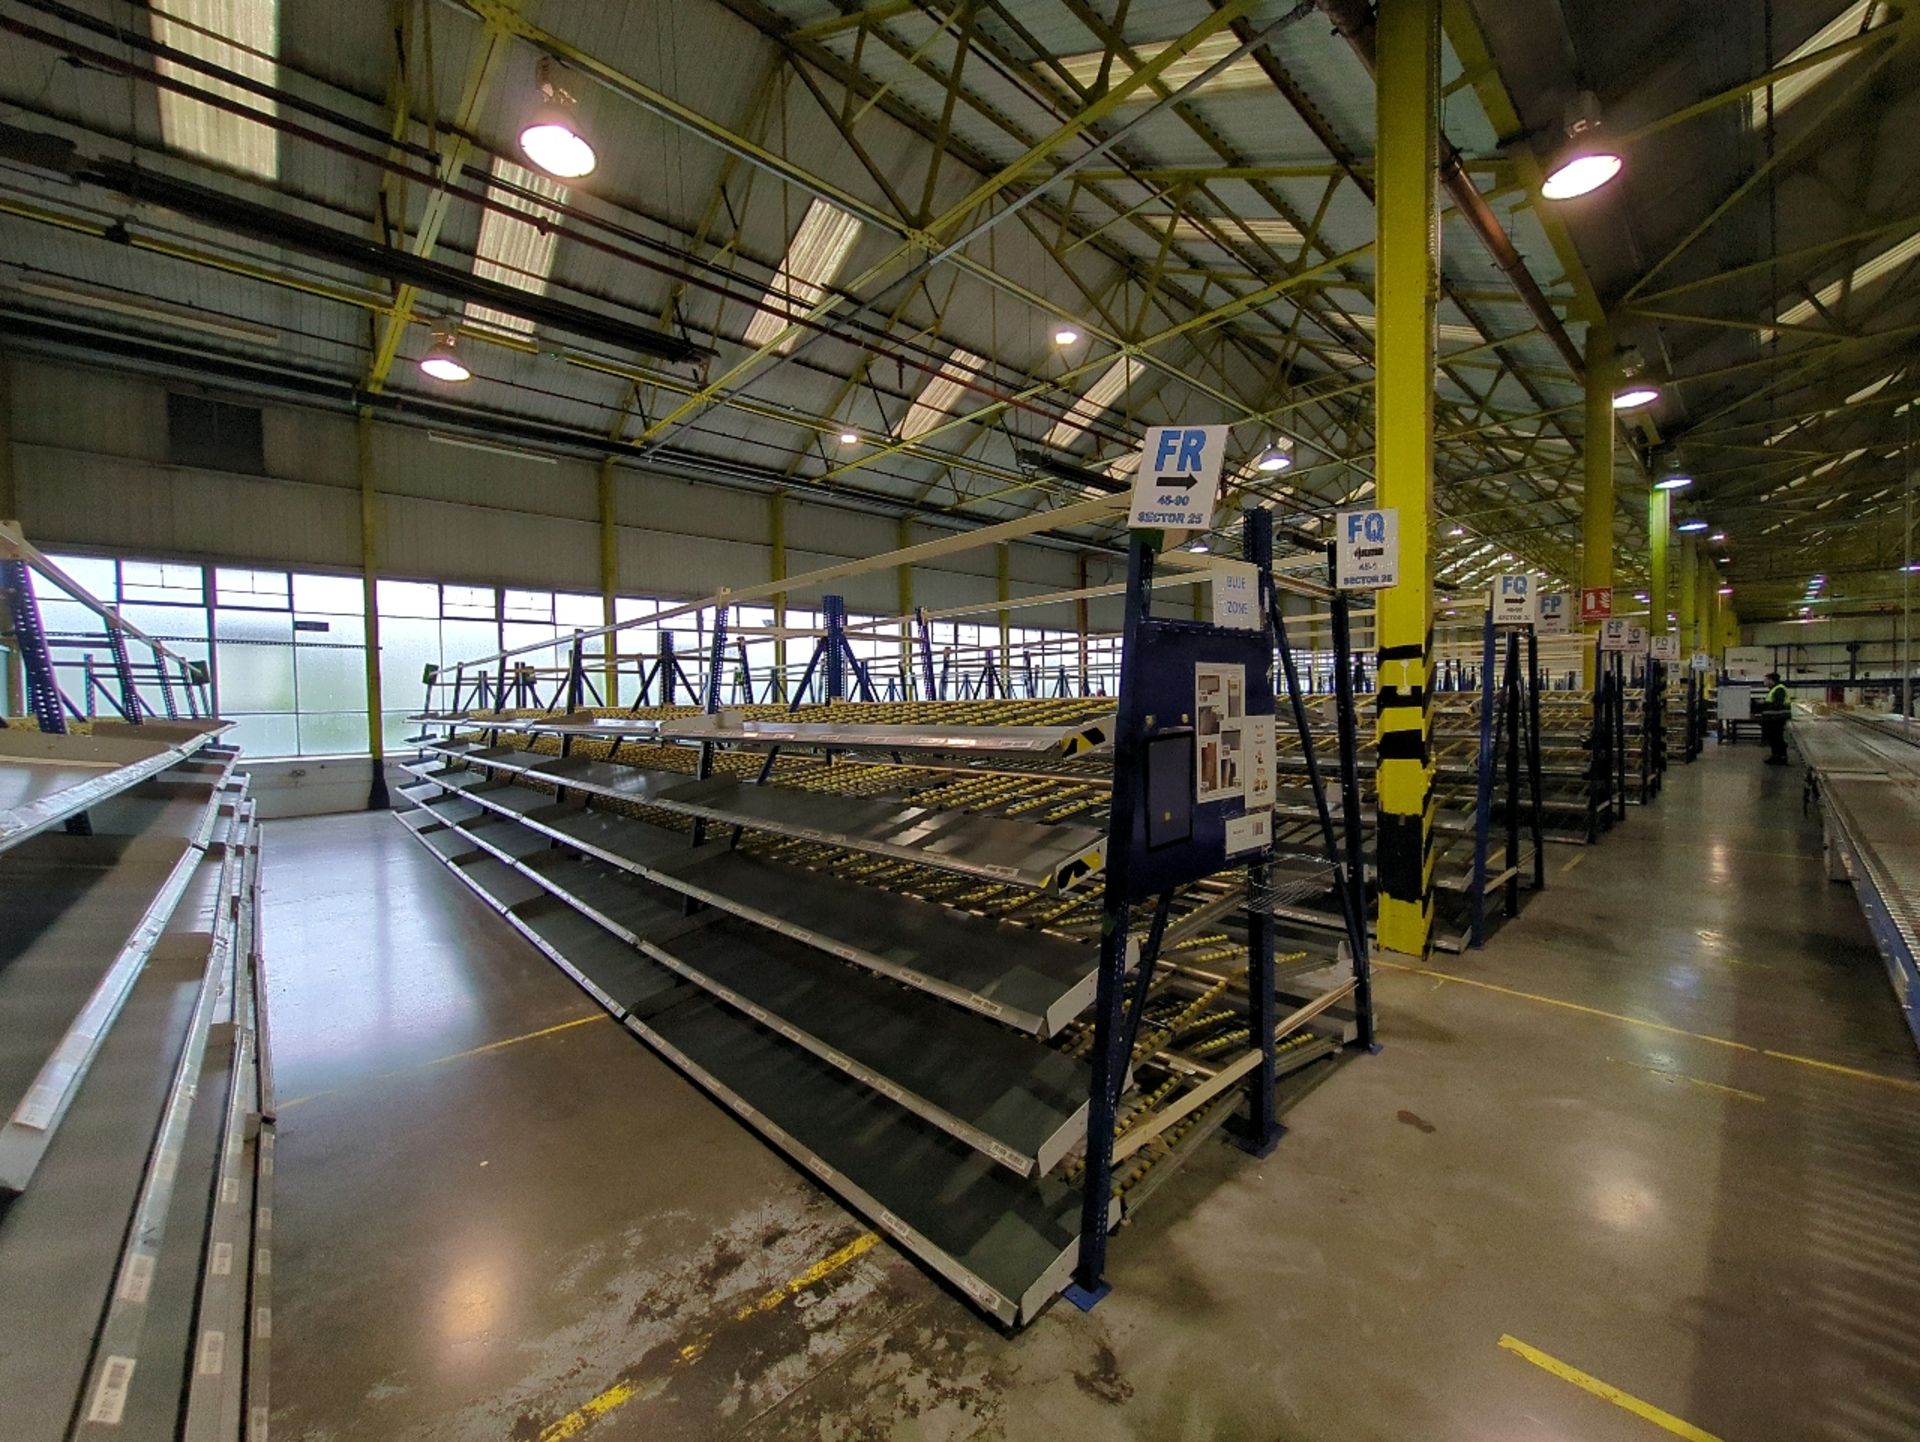 A Run Of 10 Bays Of Back To Back Kaiserkraft Roller Track With Cylindrical Rollers